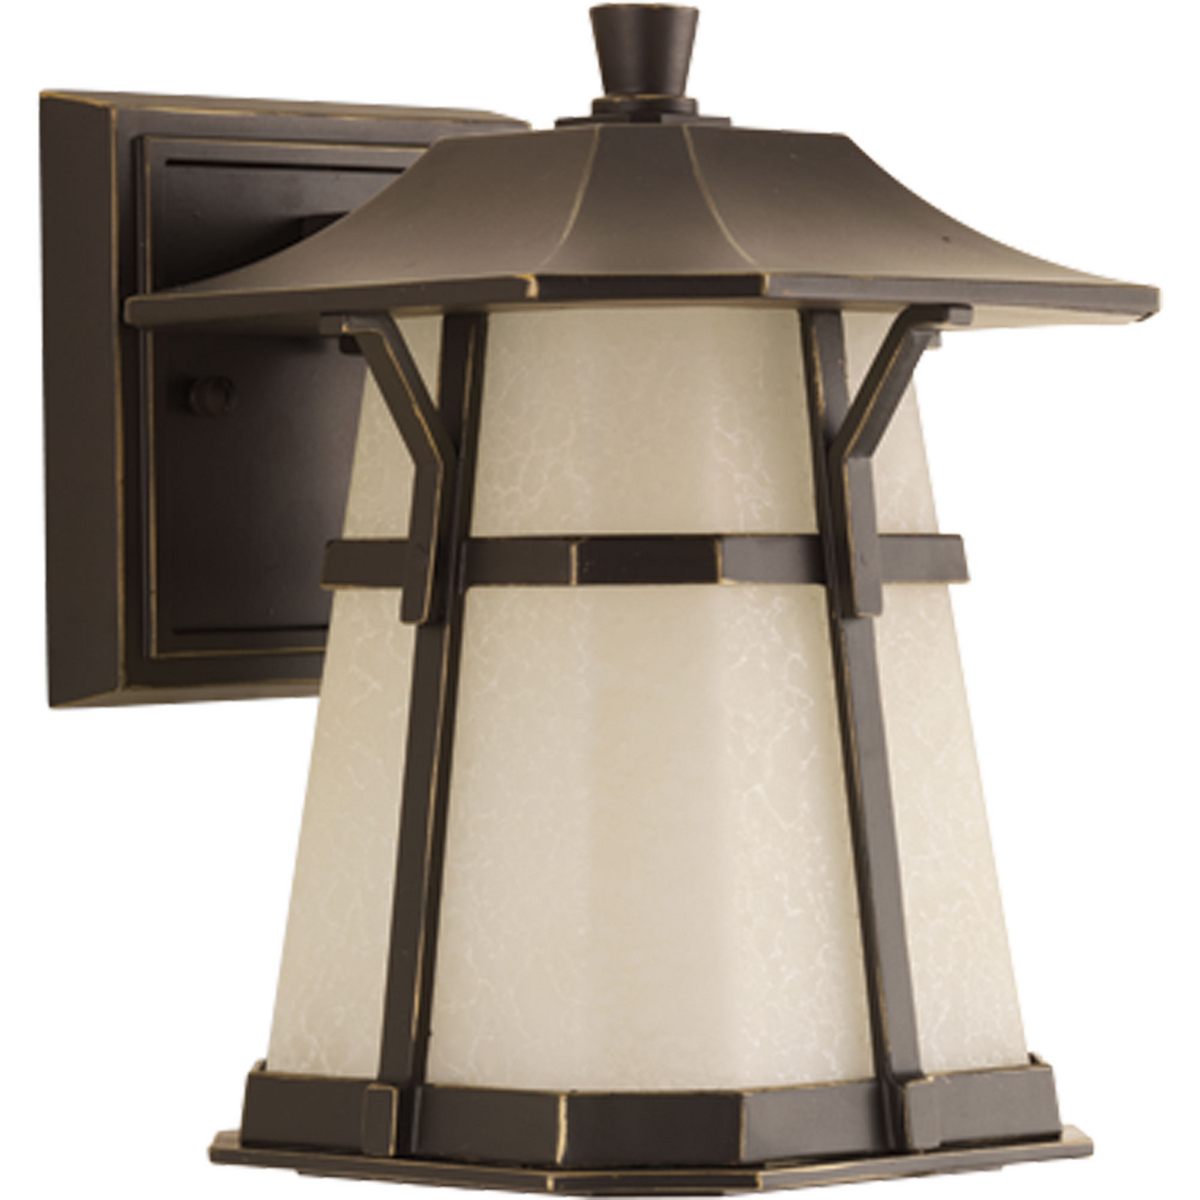 Craftsman styling marries traditional and rustic details. Artistic glass with die-cast aluminum powder coated finish. This one-light LED small wall lantern is 3000K, 90+ CRI and 623 lumens (source).